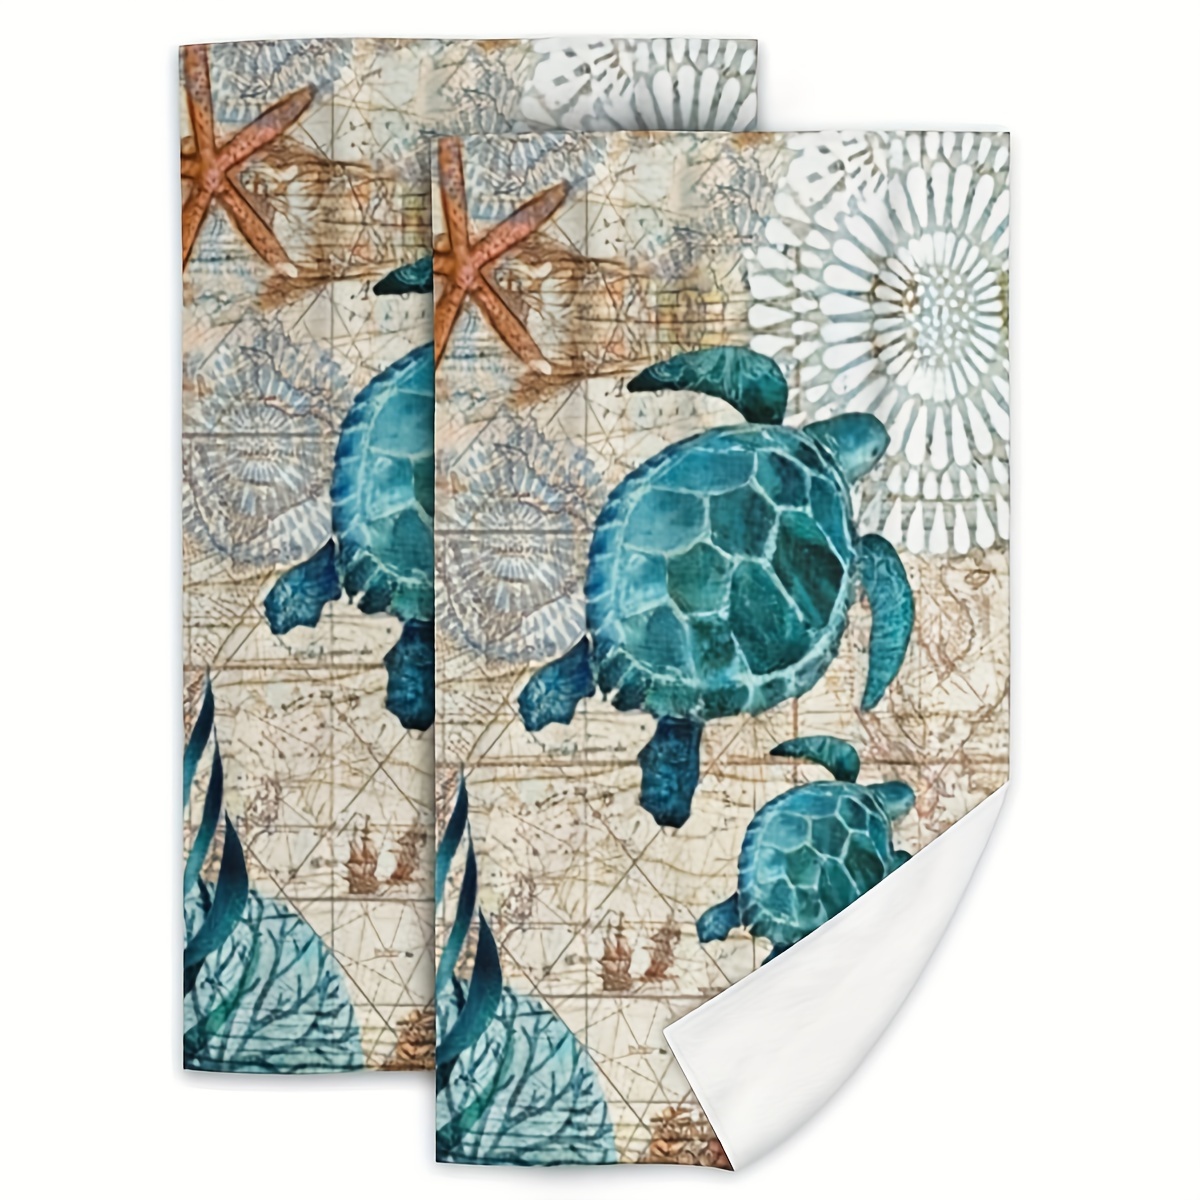 

2pcs, Hand Towels, Sea Turtle Marine Theme Dish Towels, Absorbent Soft Kitchen Towels, Colorful Printed Decorative Dishcloth For Kitchen, Room Decor, Kitchen Supplies